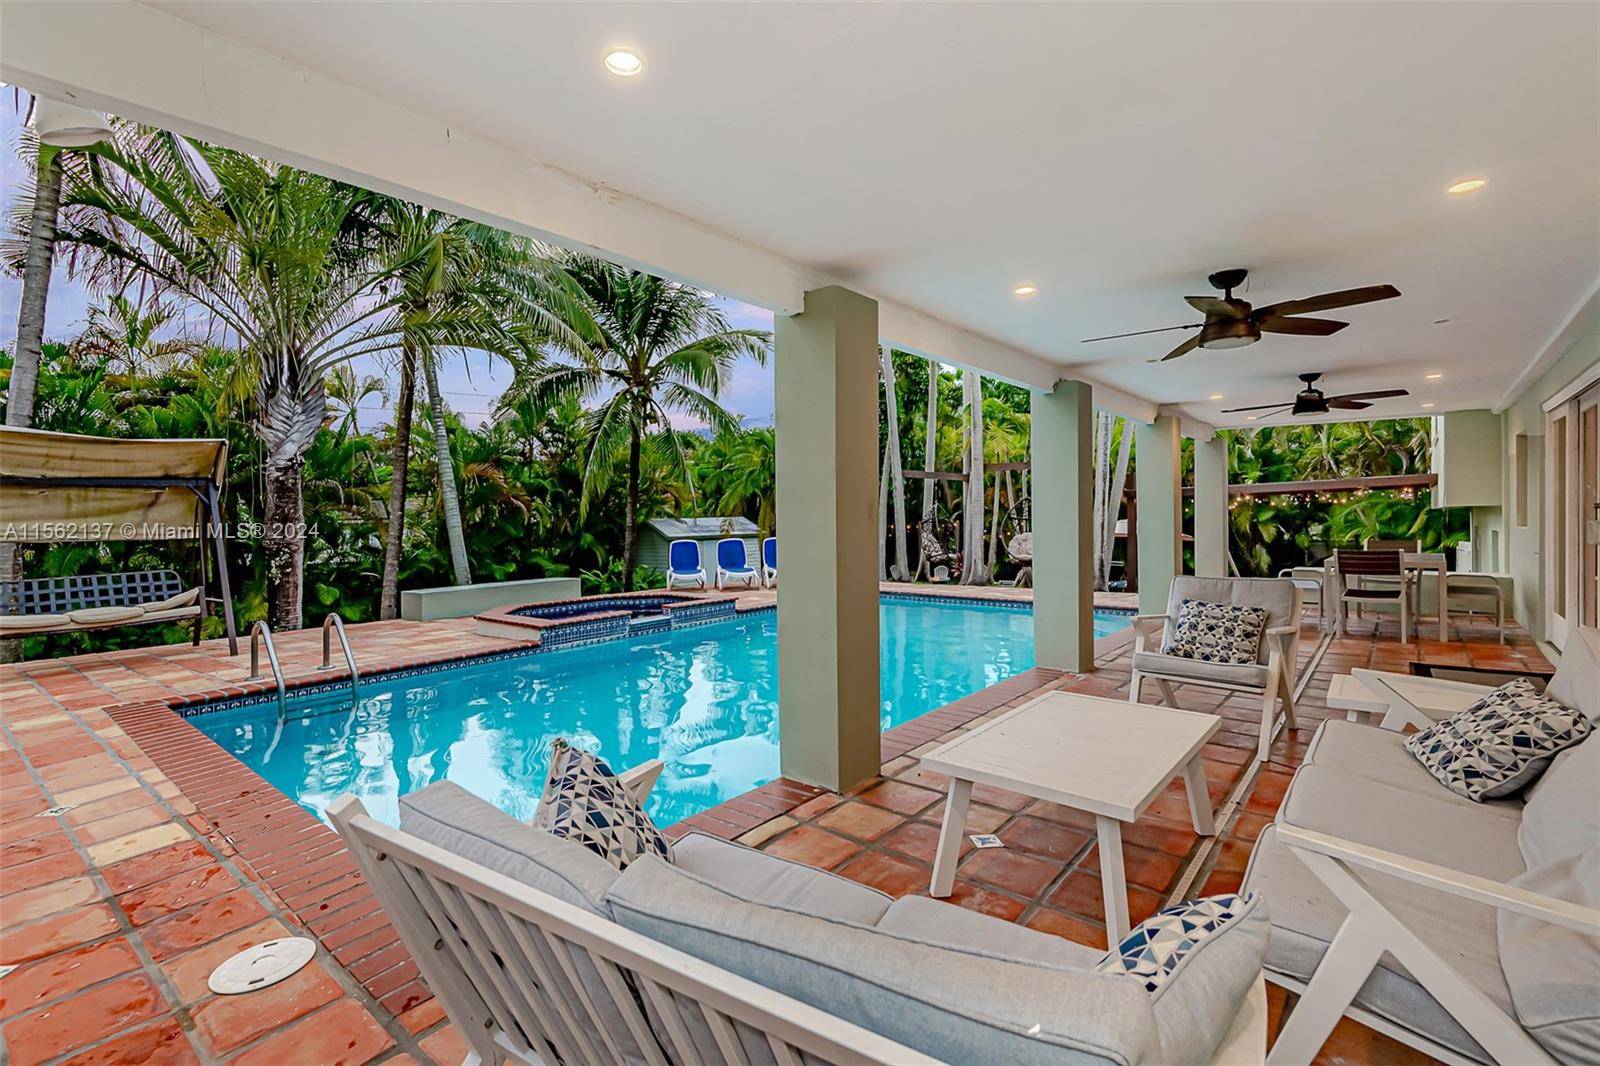 This stunning Pinecrest home has been exquisitely updated and is move in ready.